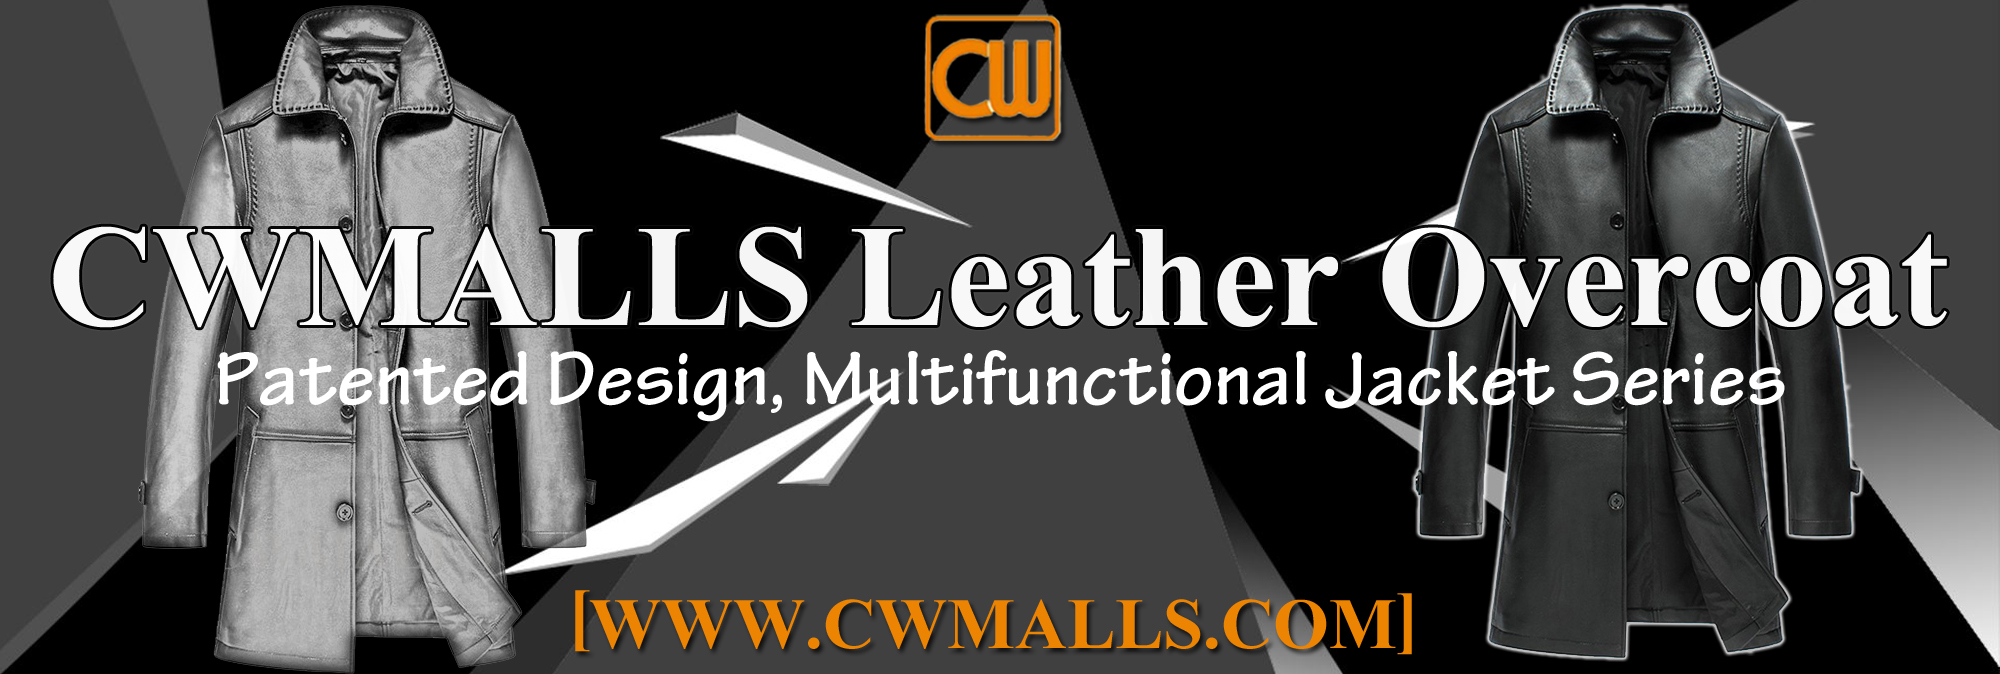 CWMALLS Leather Overcoat